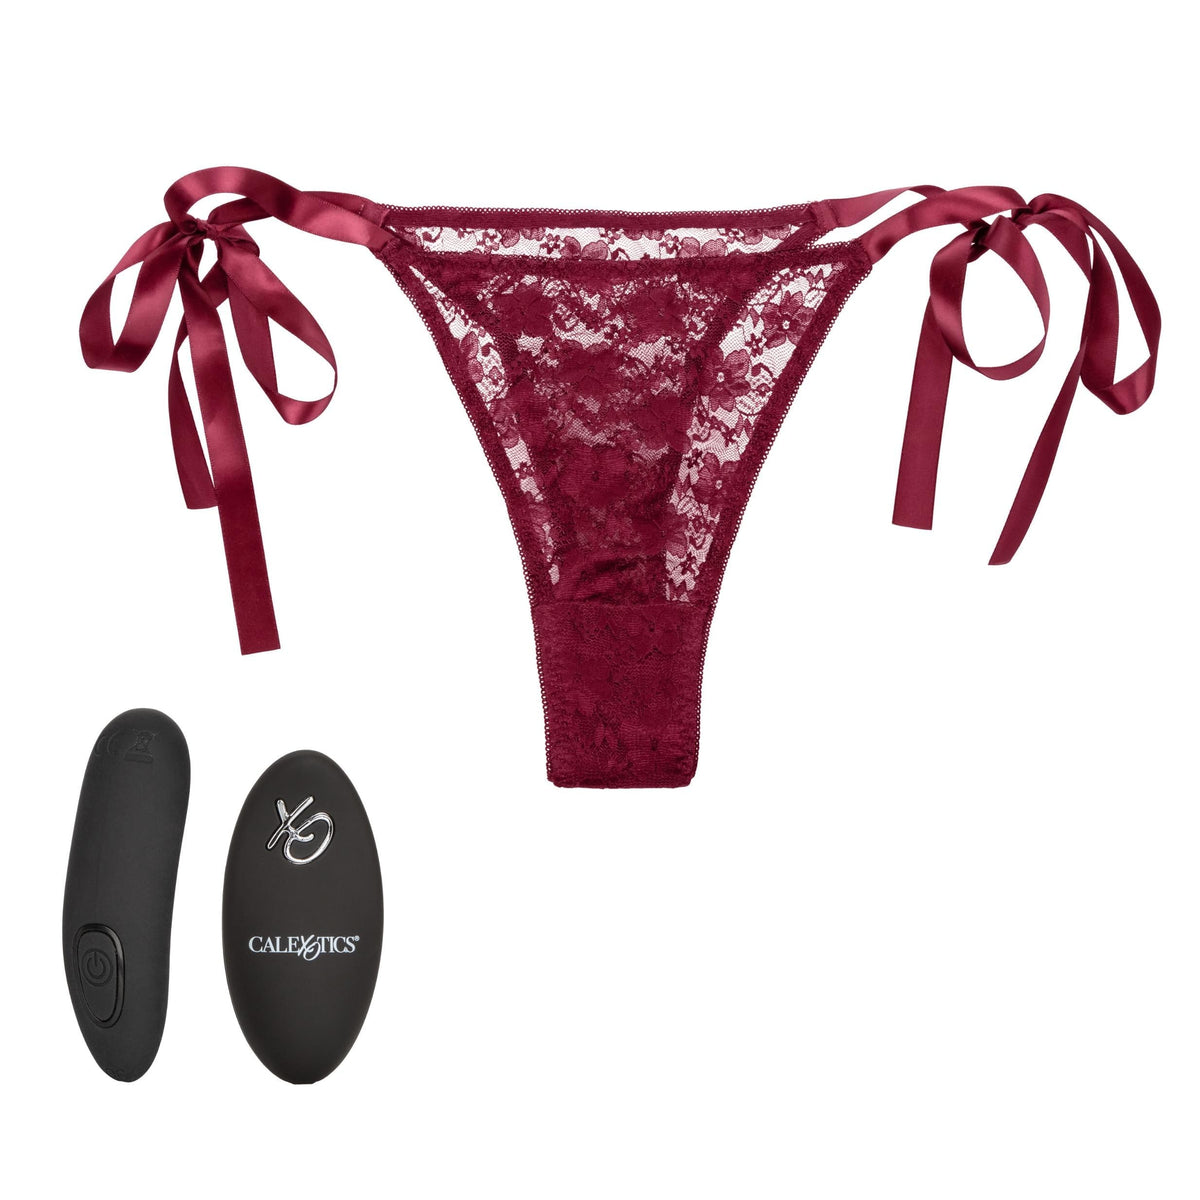 remote control lace thong set burgundy